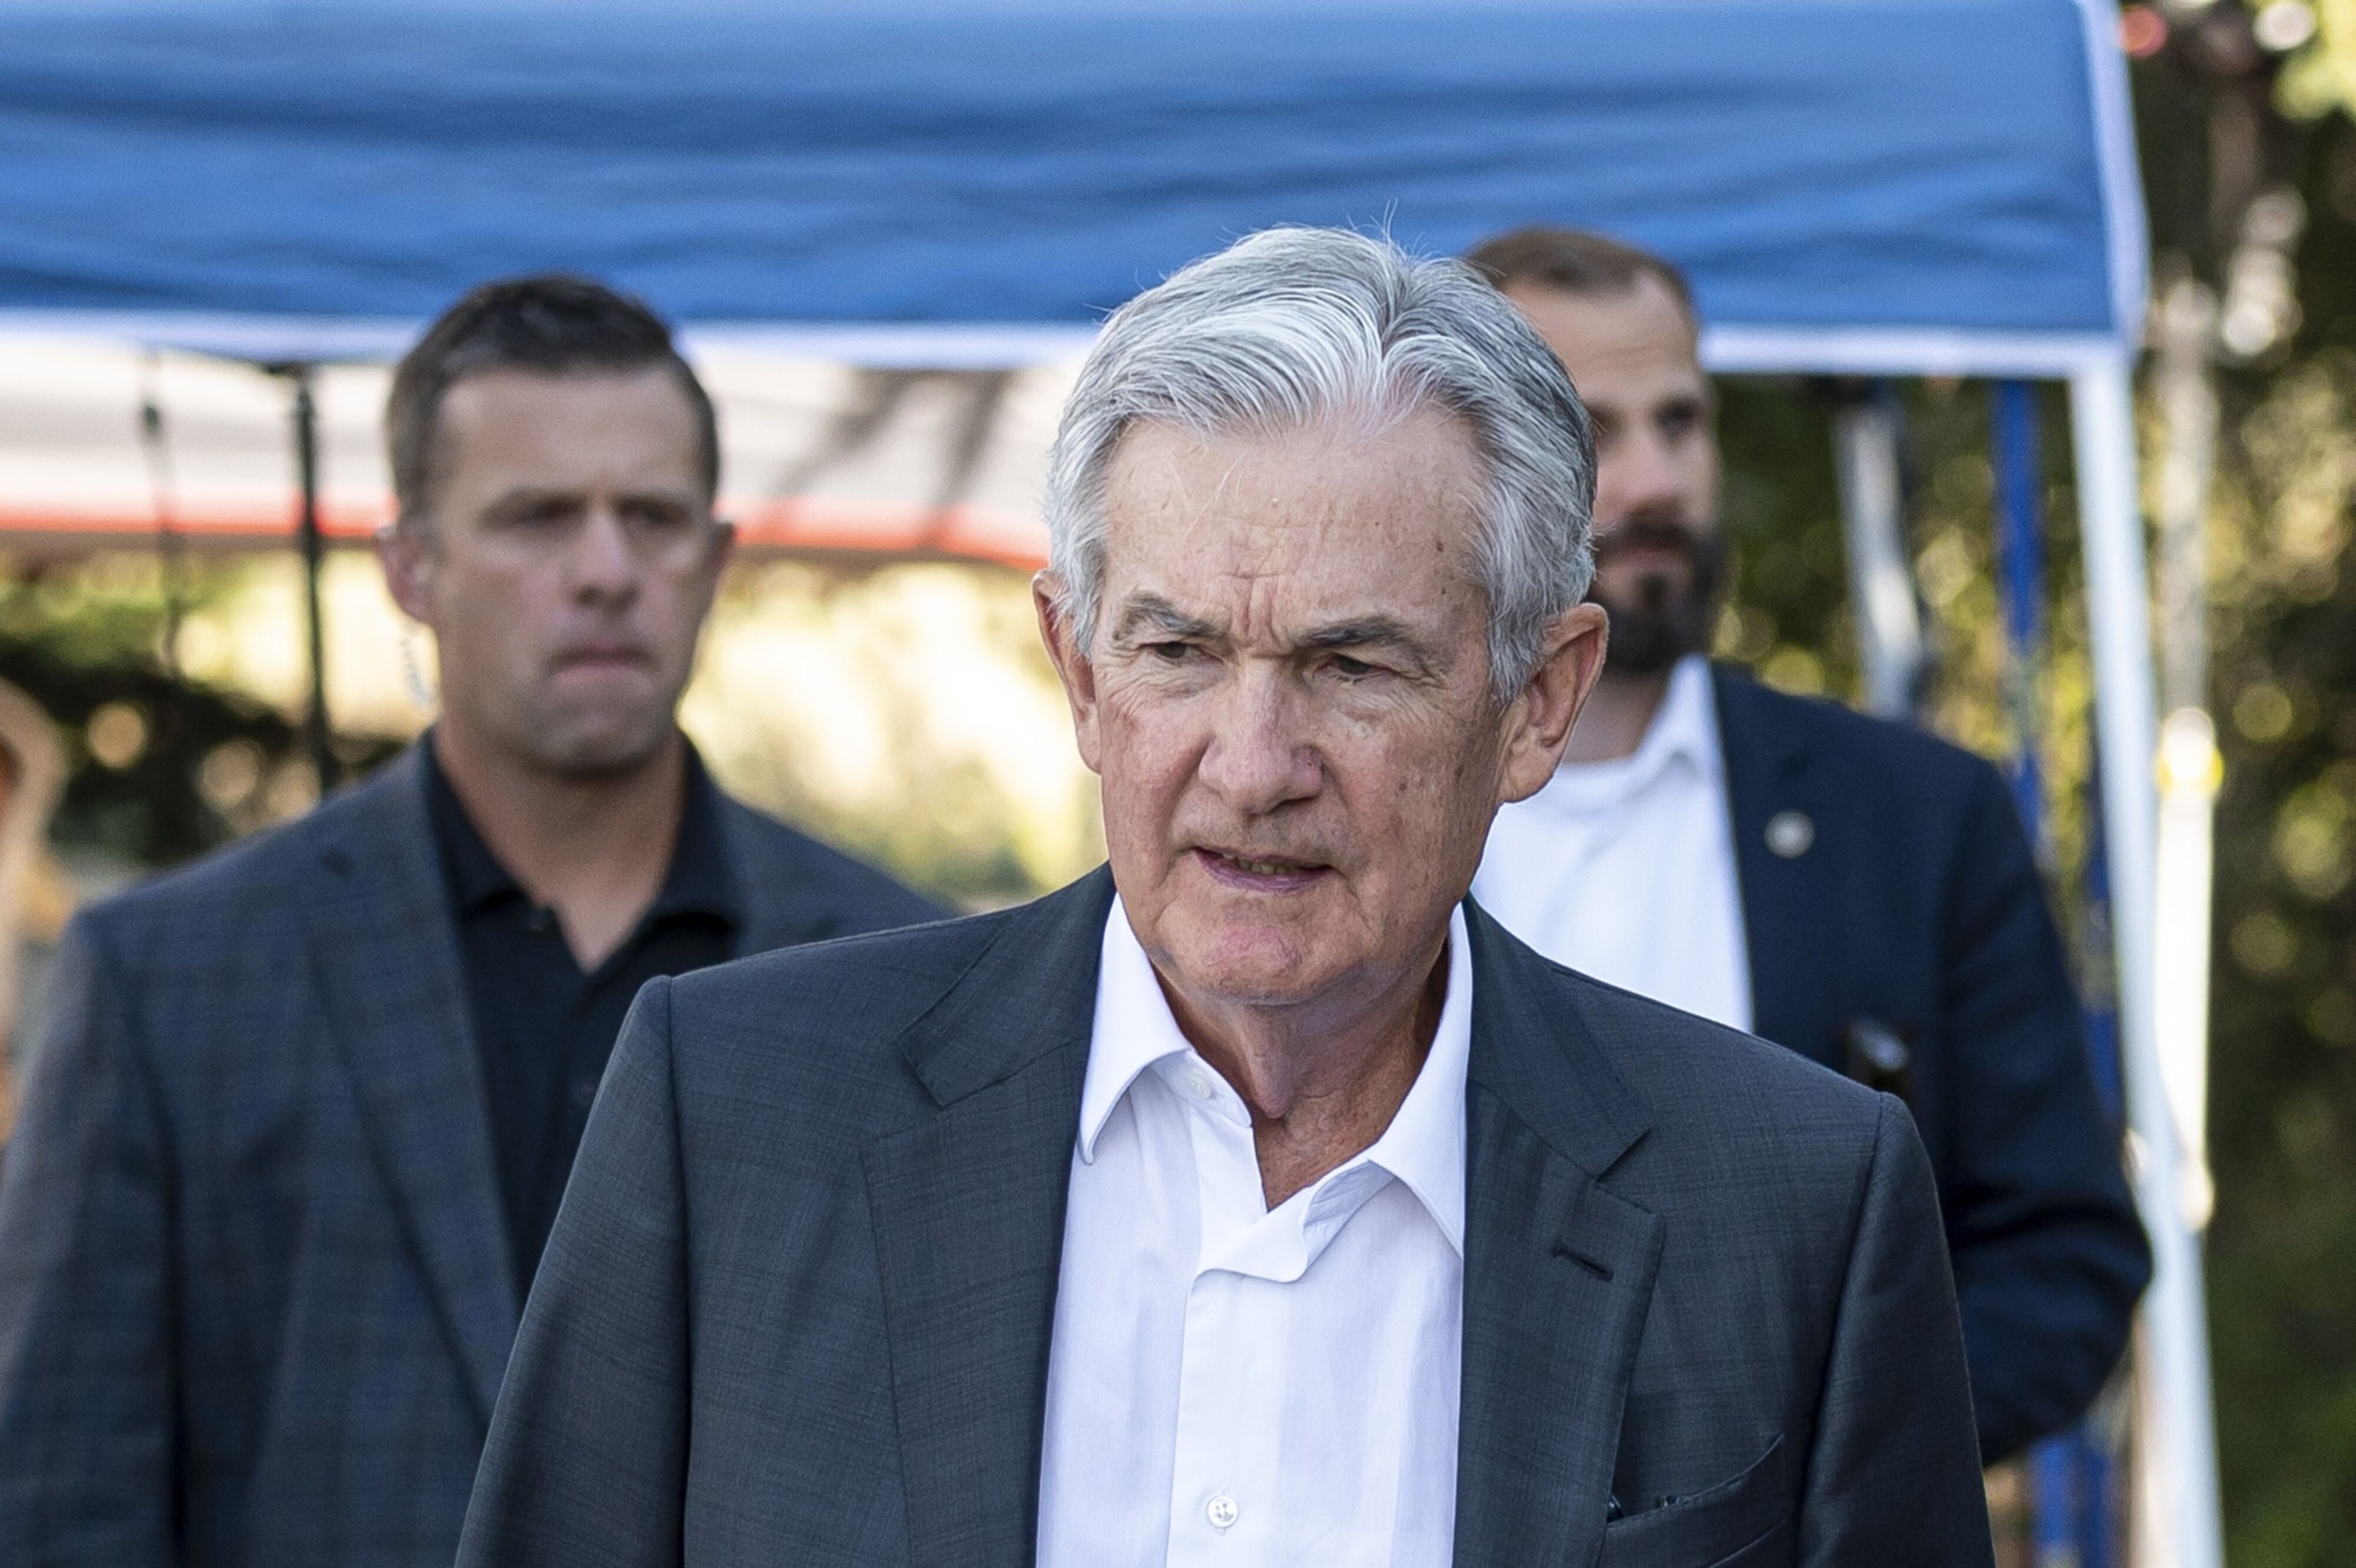 Photo: Jerome Powell, chairman of the U.S. Federal Reserve, walks the grounds at the Jackson Hole economic symposium in Moran, Wyoming, on August 25, 2023.